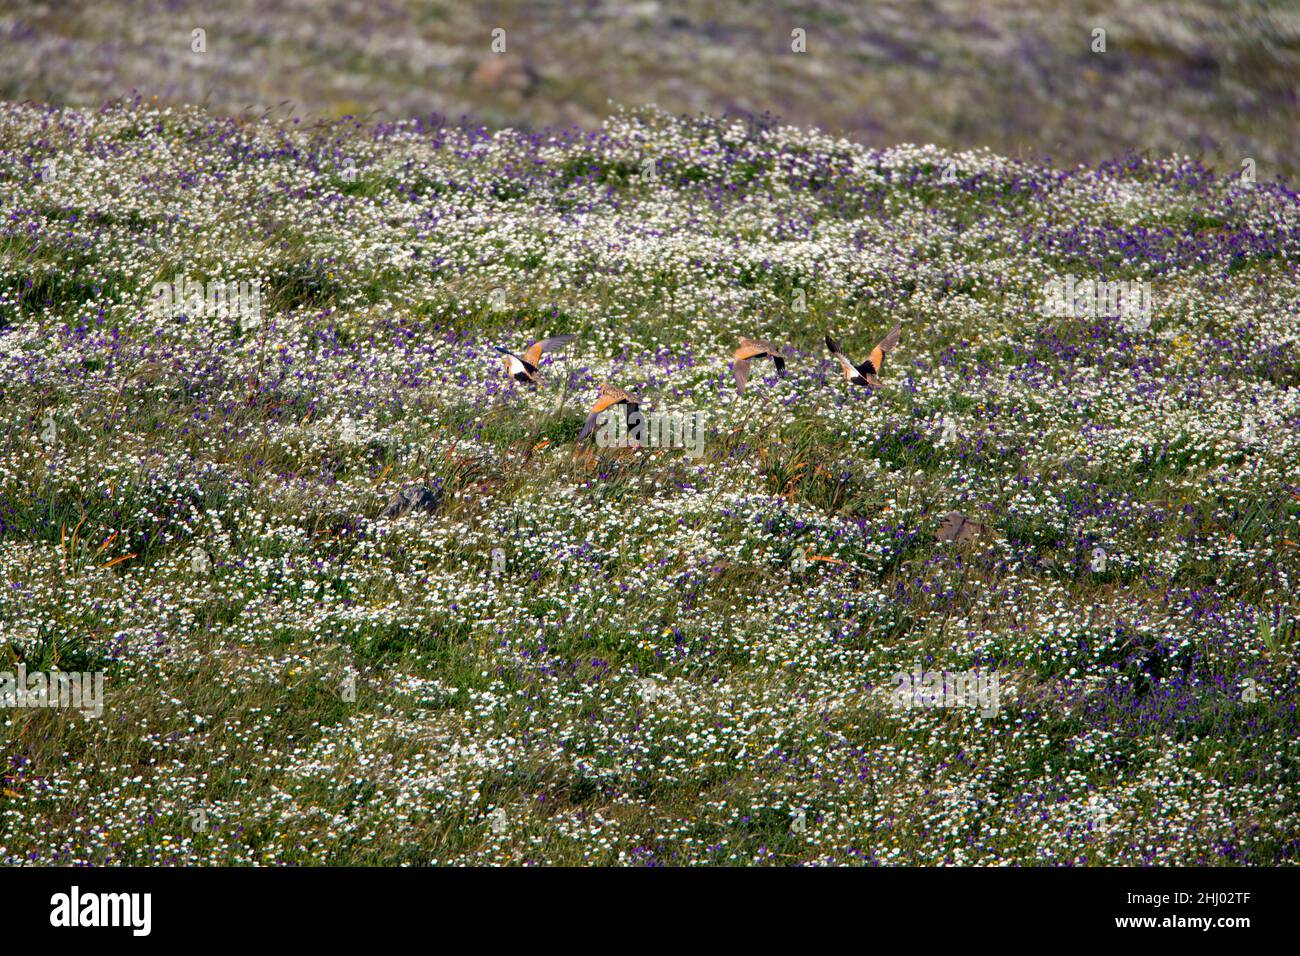 Black-bellied Sandgrouse (Pterocles orientalis) flying over meadow with wild flowers Castro Verde Alentejo Portugal Stock Photo